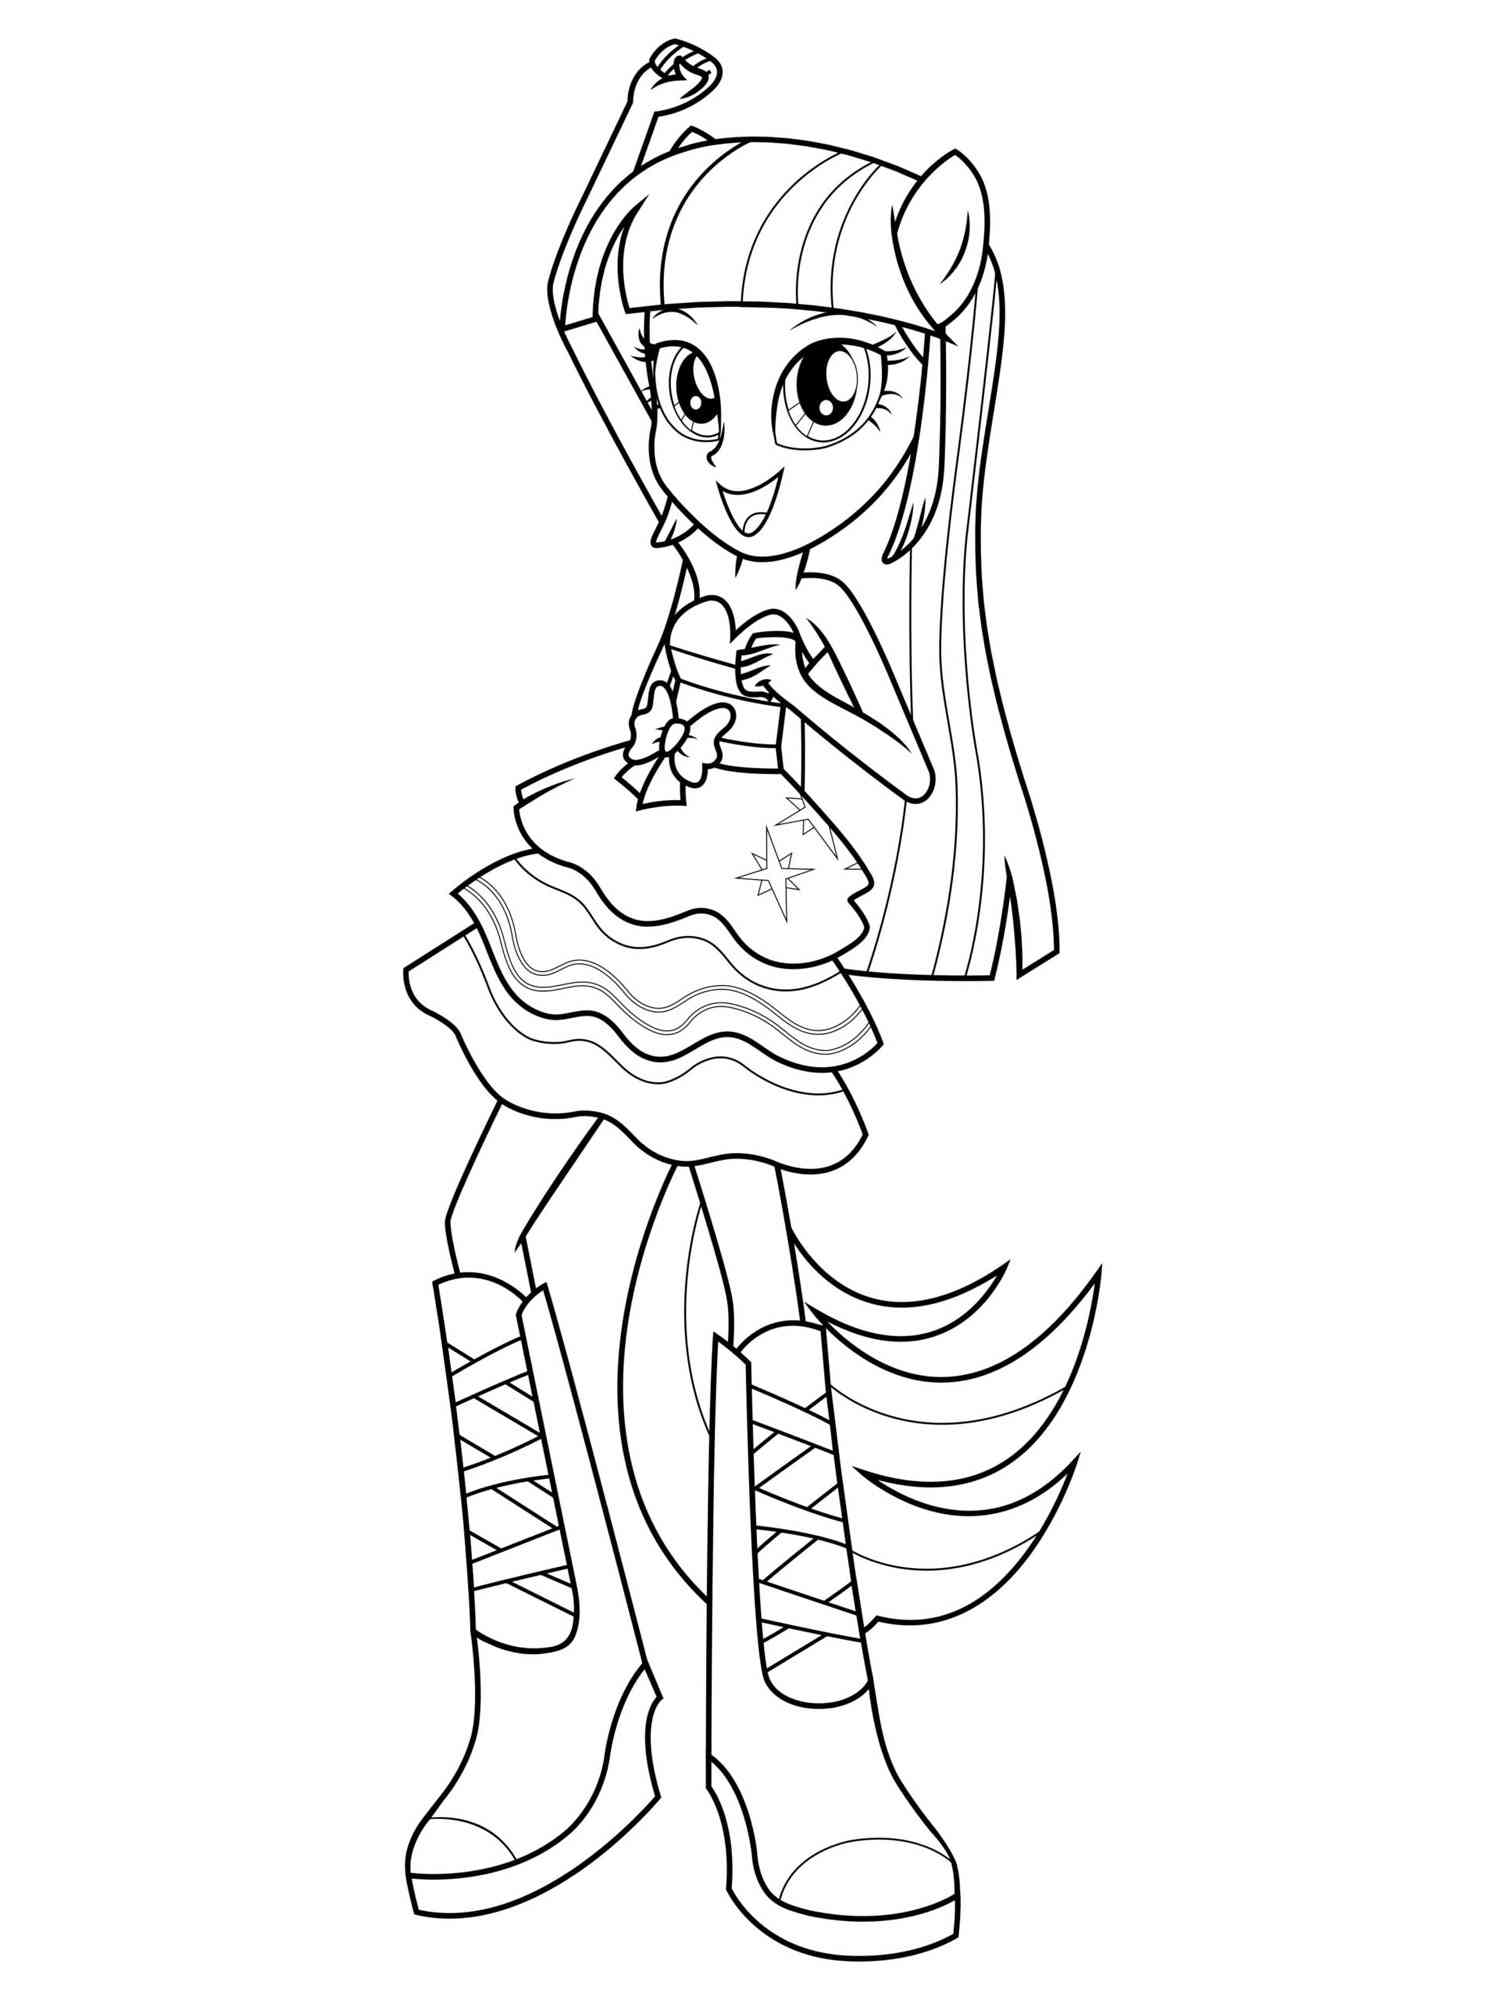 Equestria girls coloring pages. Download and print Equestria girls ...